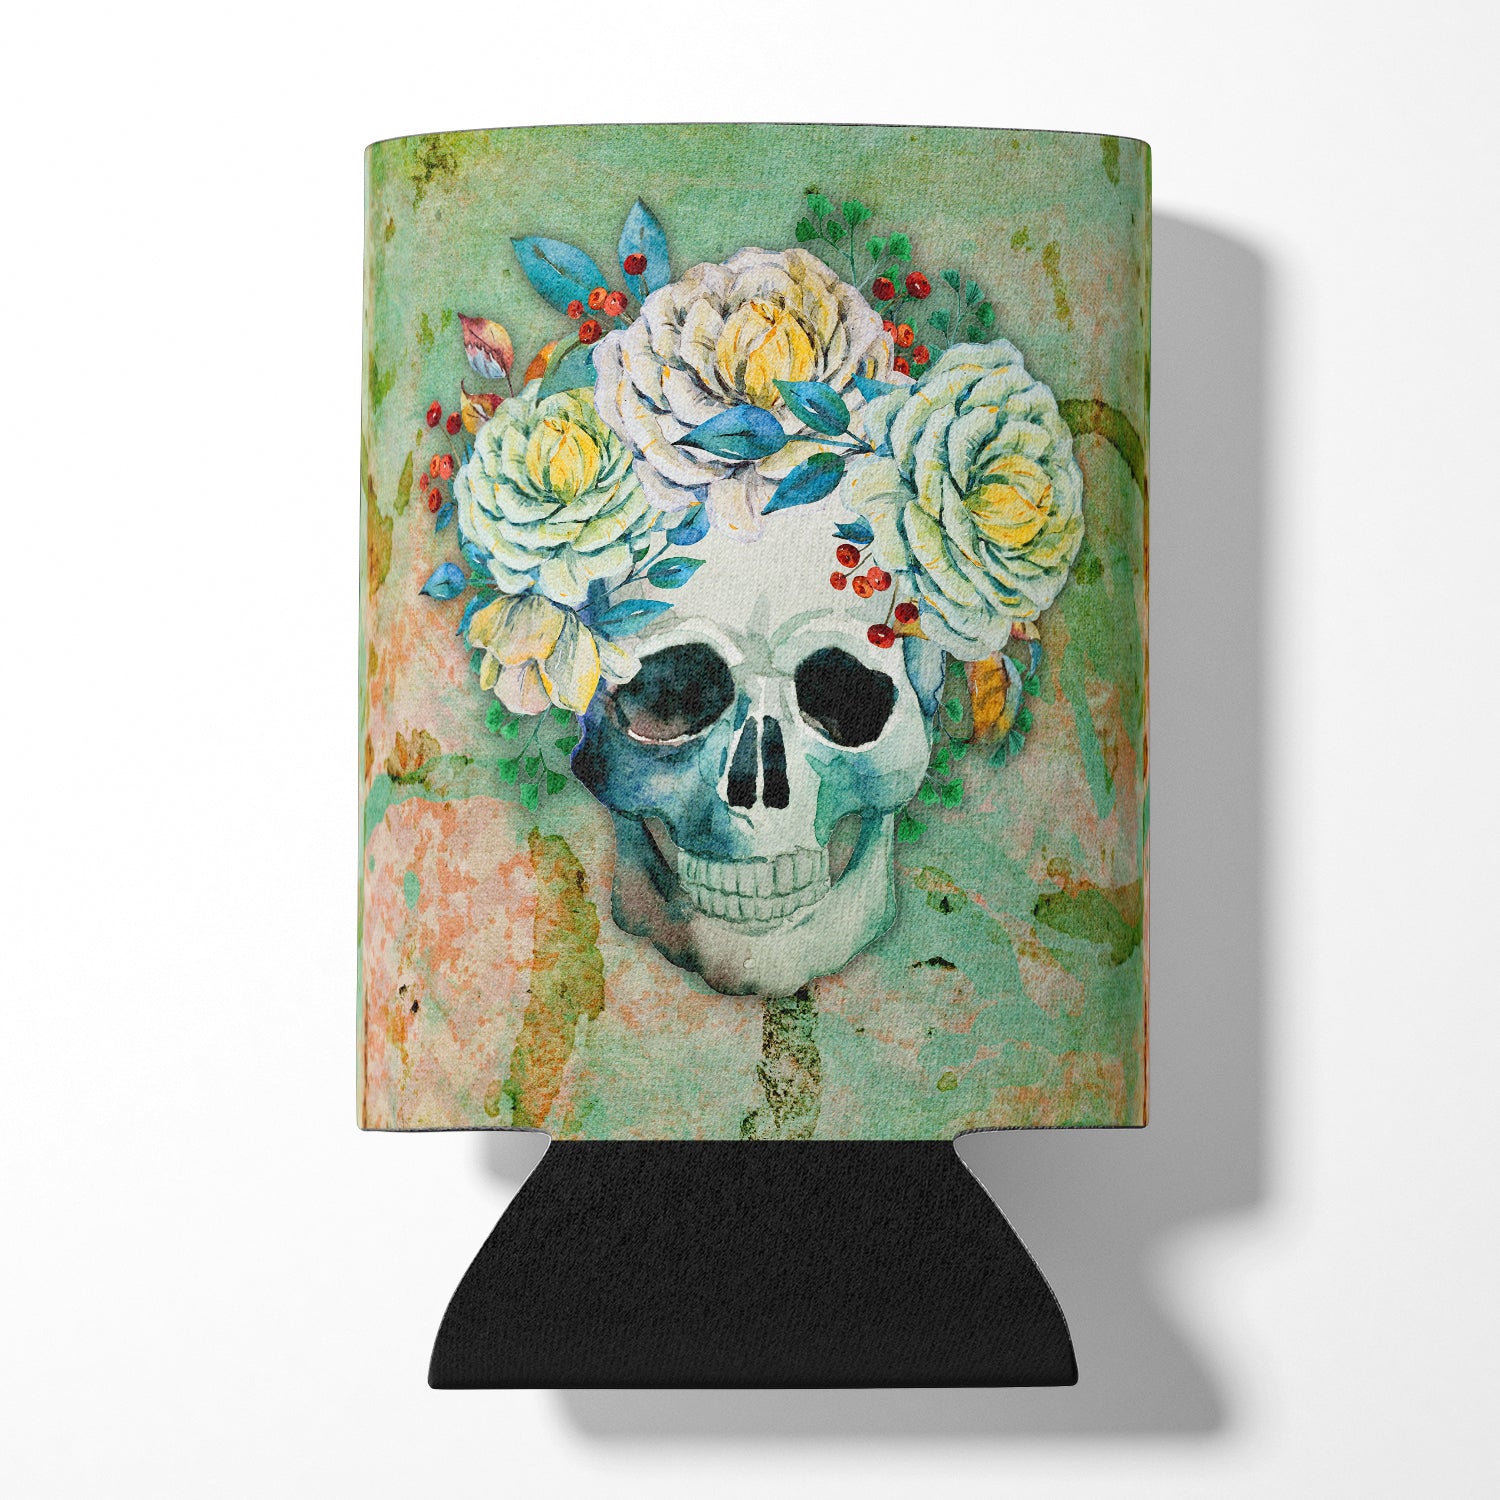 Day of the Dead Skull with Flowers Can or Bottle Hugger BB5124CC  the-store.com.